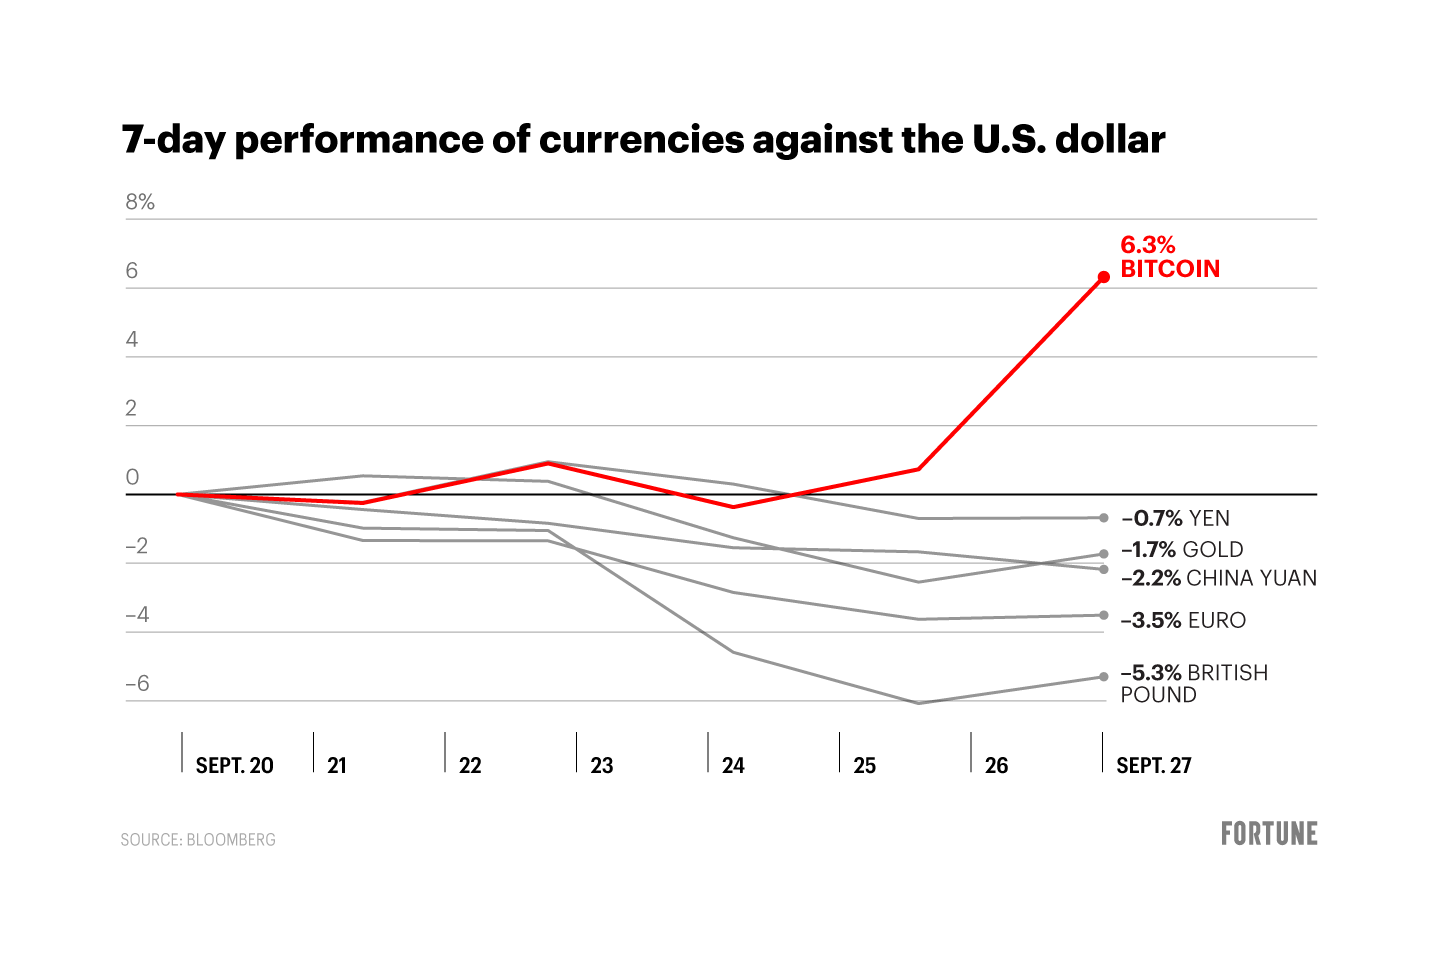 Bitcoin is outperforming major currencies.